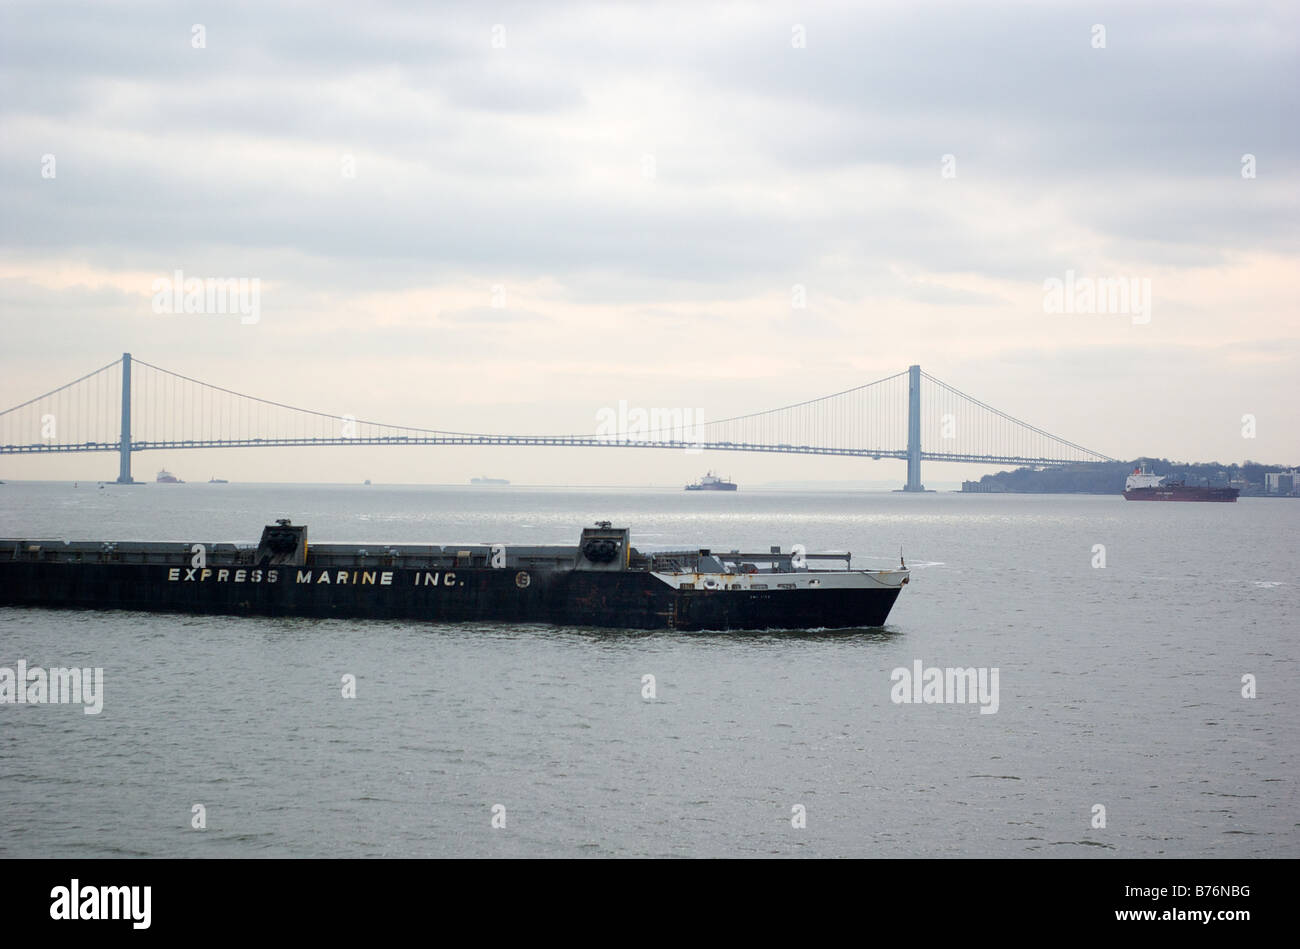 Verrazano Narrows Bridge and Express Marine Barge in Upper New York Bay USA (For Editorial Use Only) Stock Photo